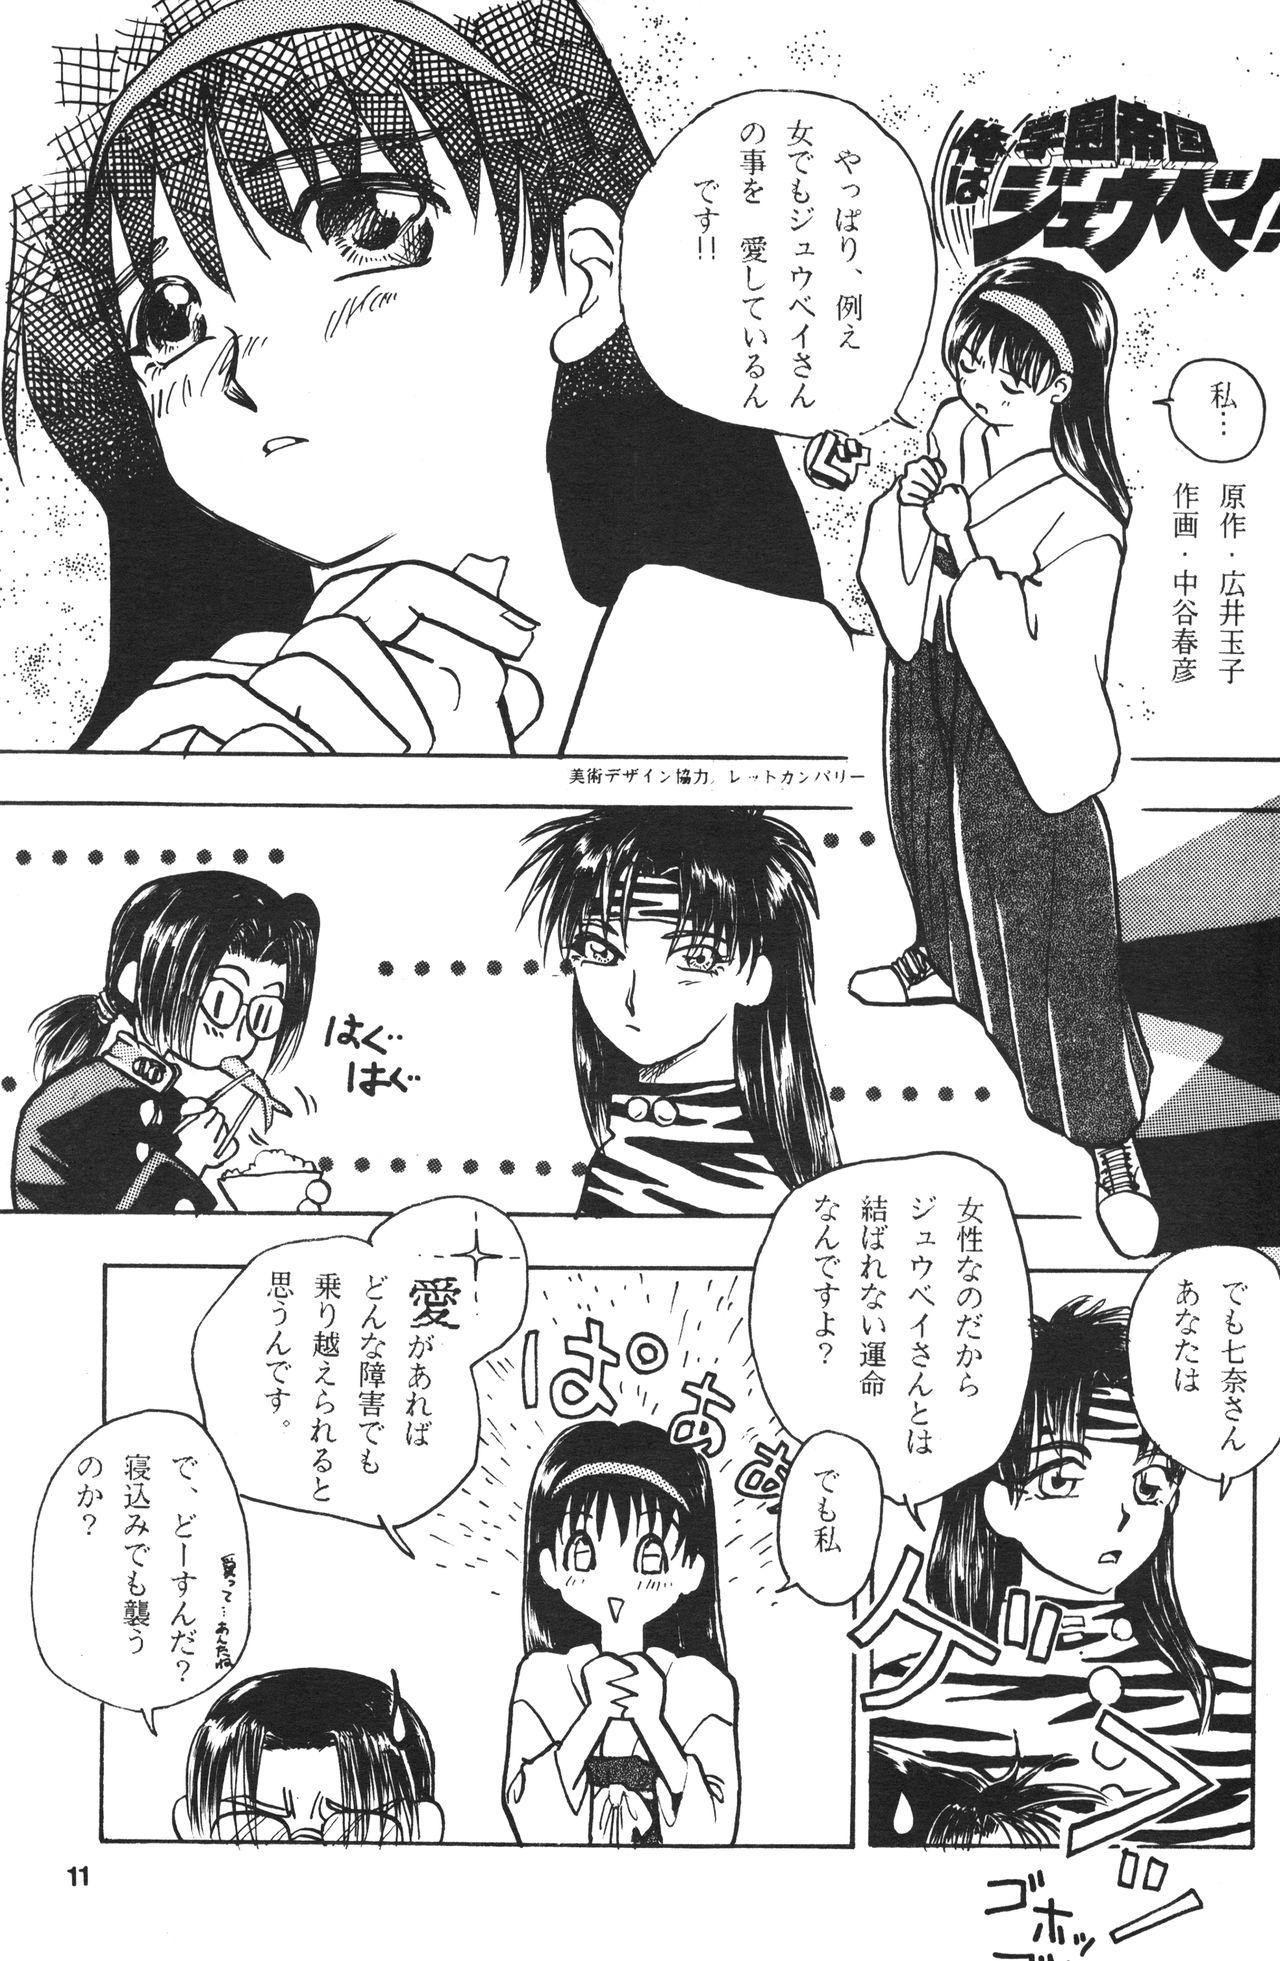 De Quatro Seinen Sunday - Street fighter Ranma 12 Ghost sweeper mikami Reversecowgirl - Page 10